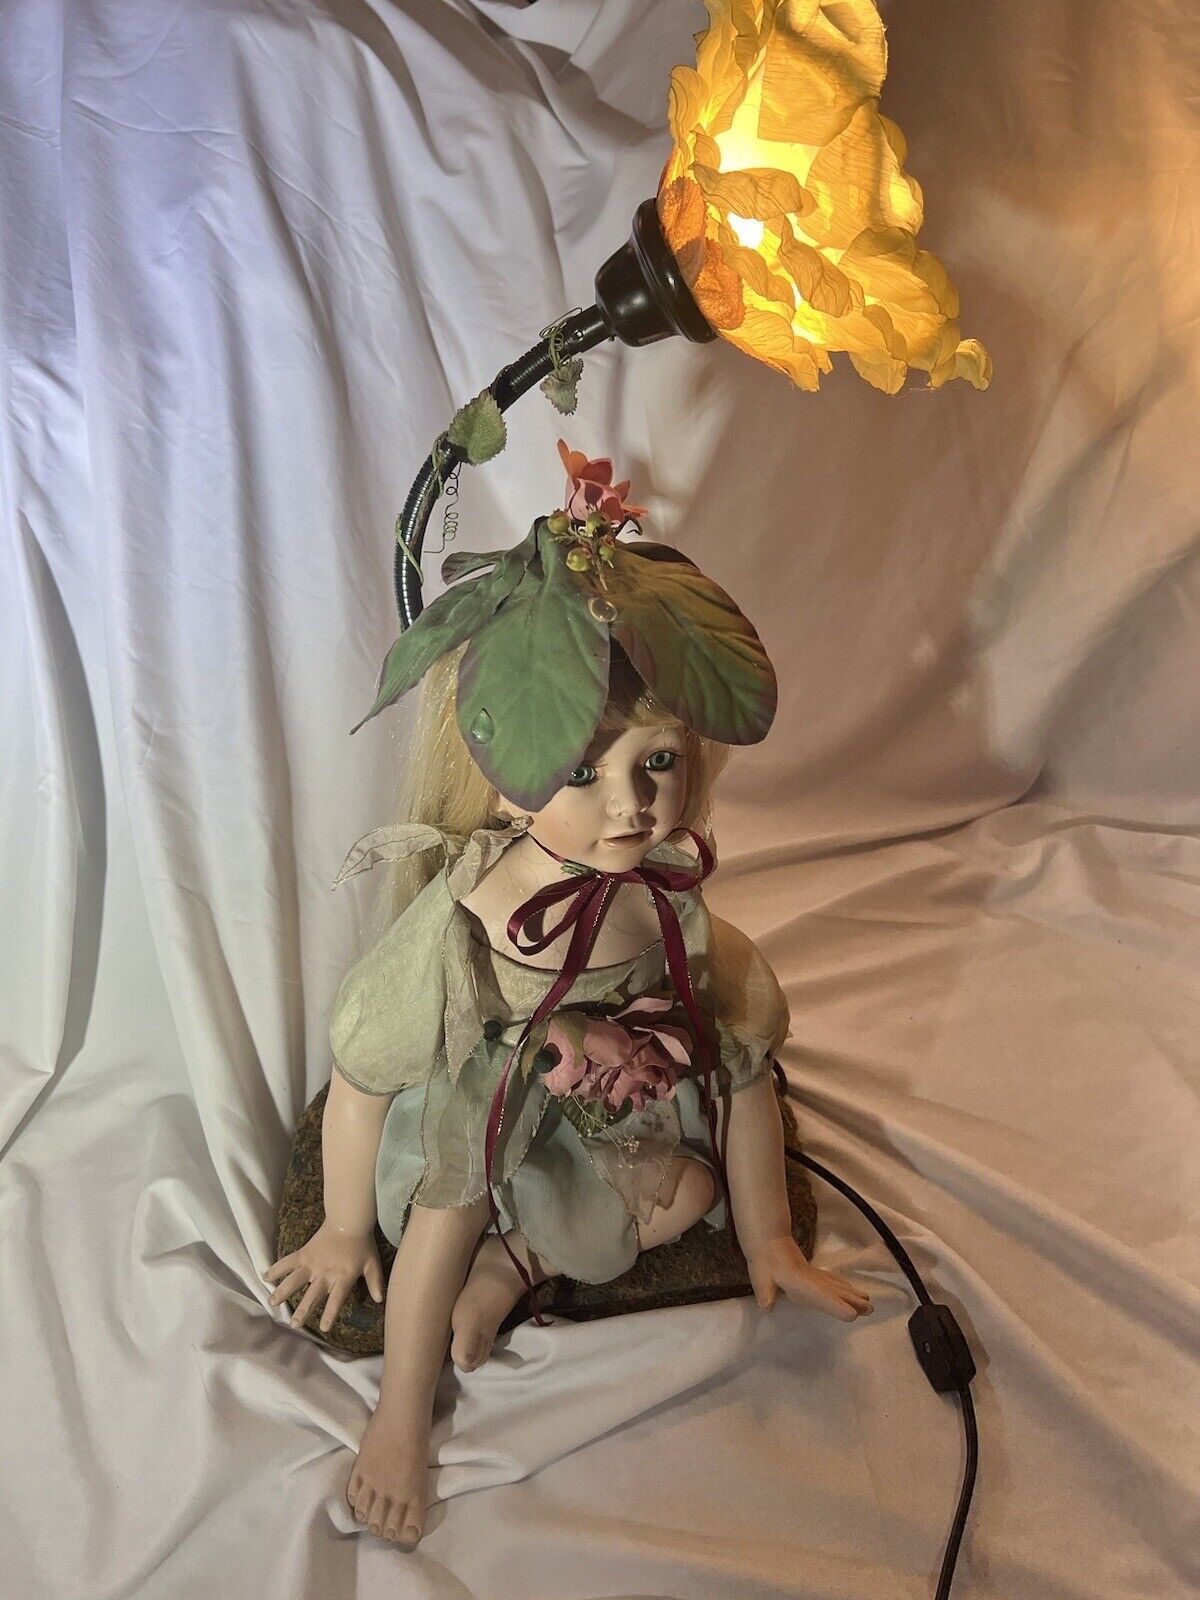 Duck House heirloom porcelain doll Flower Lamp Adjustable 13”From Base Up To 25